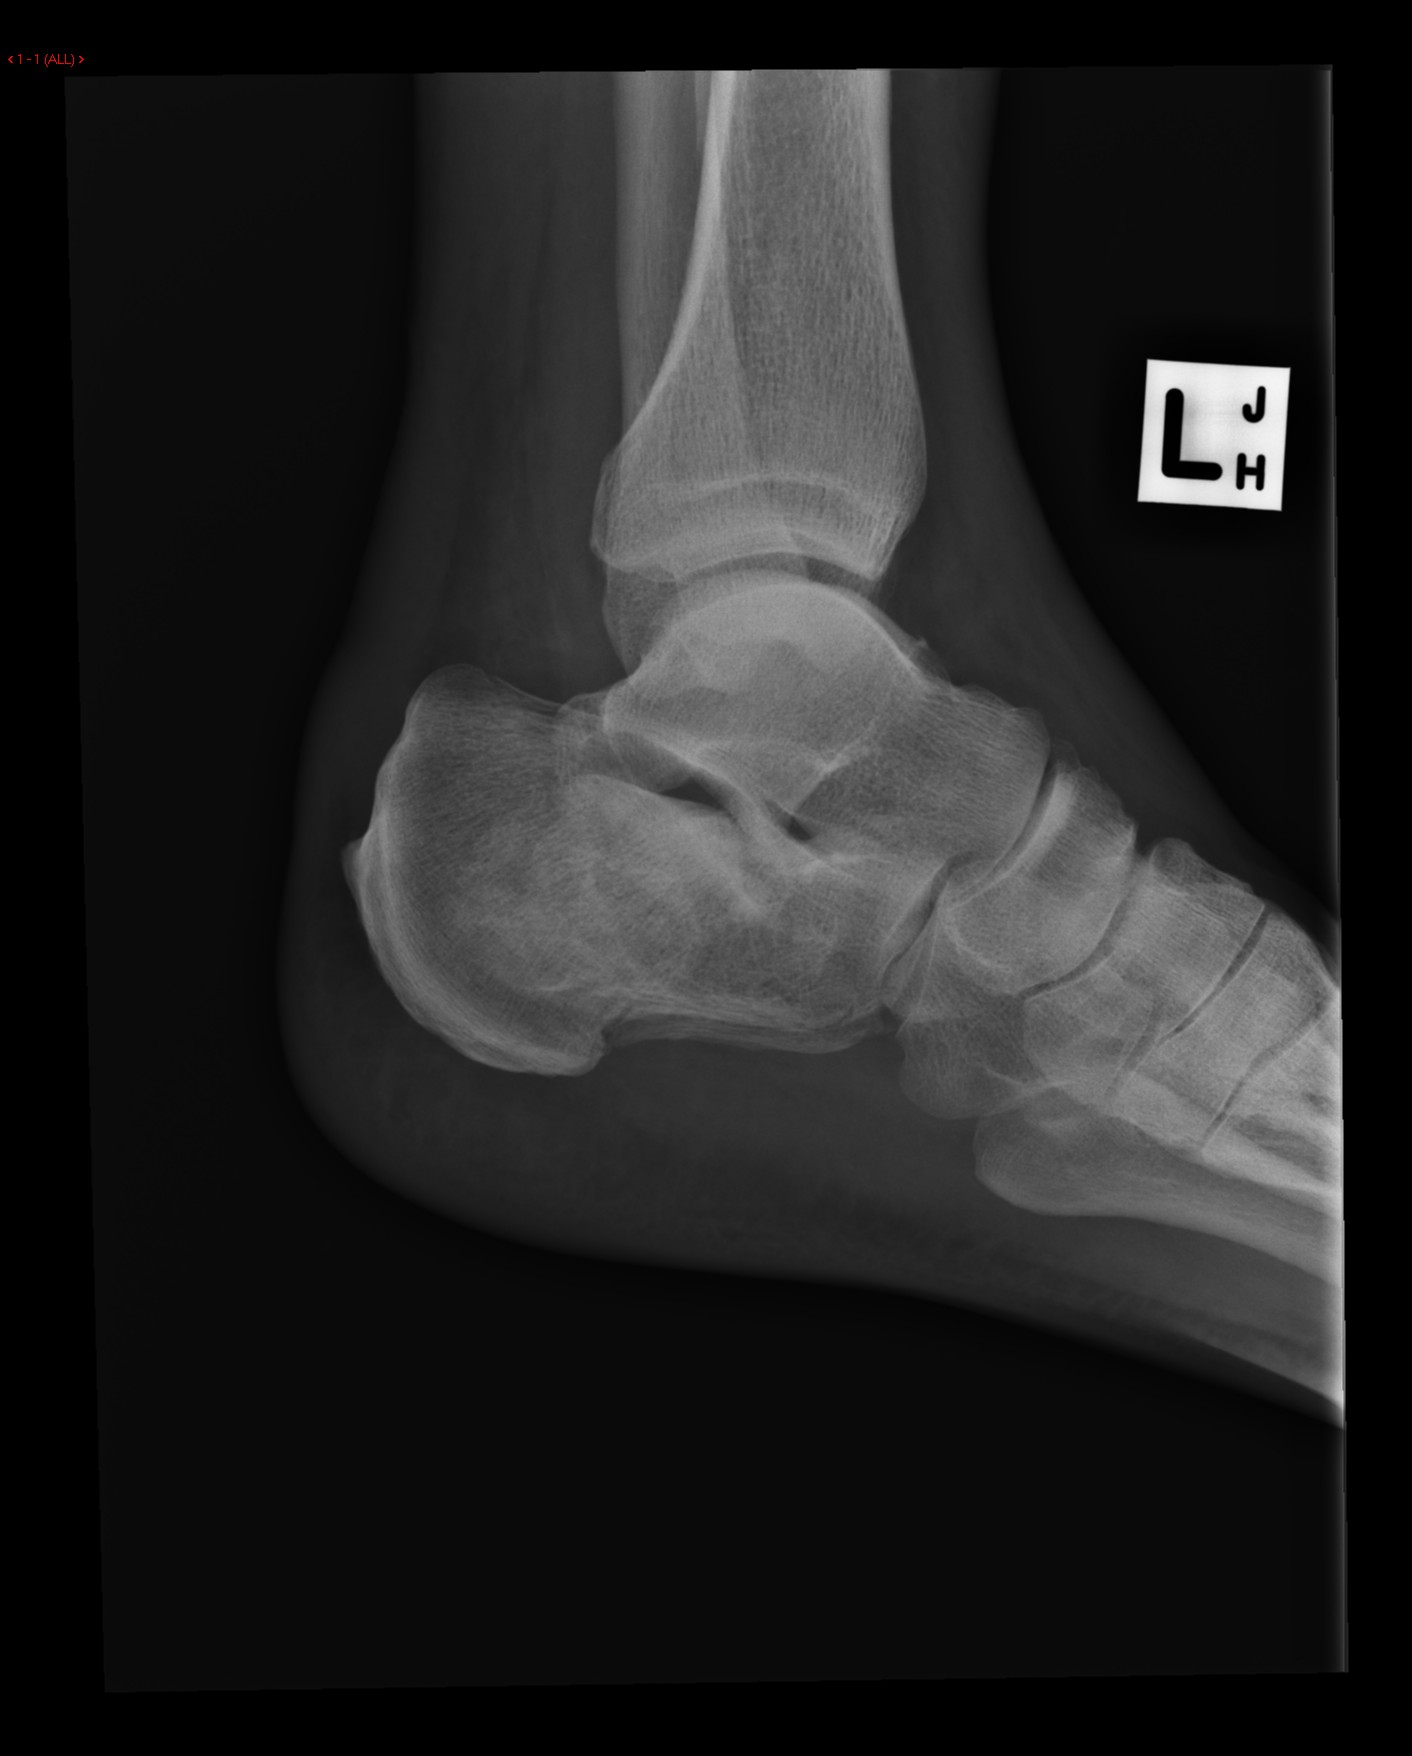 Lateral Plain films show a comminuted fracture of the left calcaneus with a flattening of Bohler's angle.